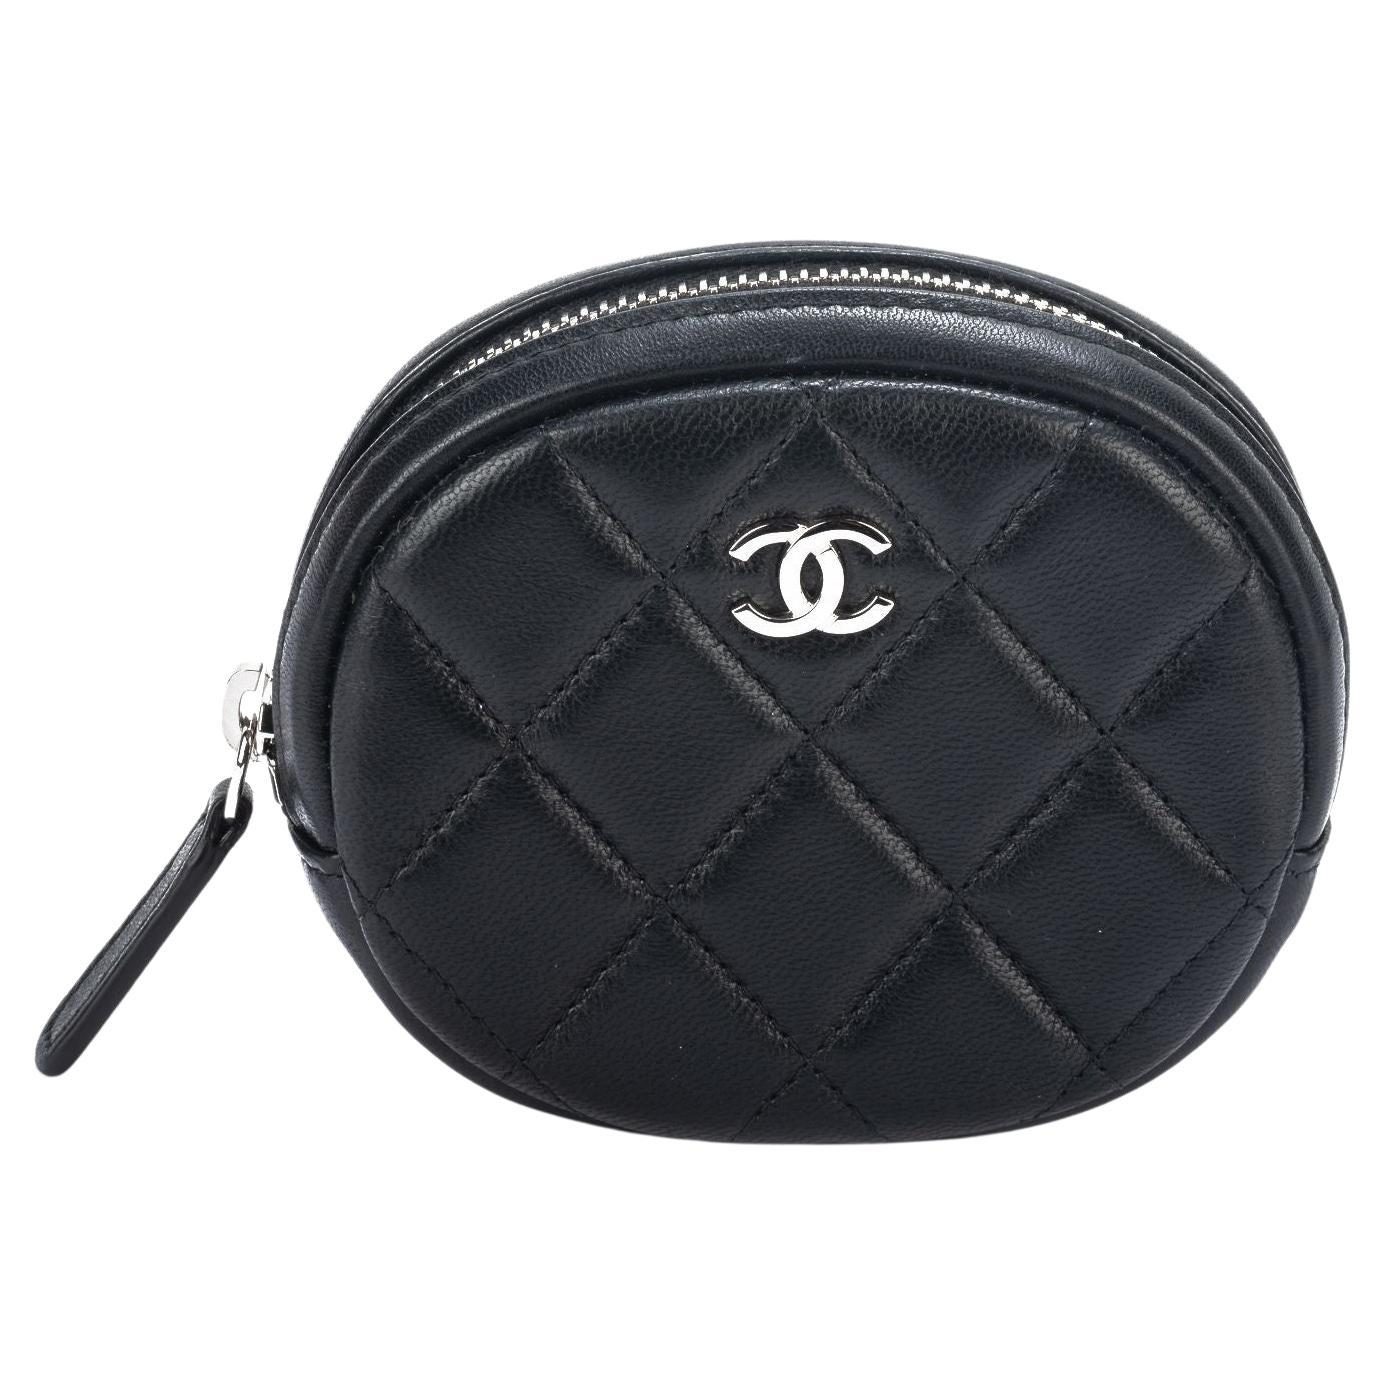 Chanel Coin Pouch - 11 For Sale on 1stDibs  chanel new york coin purse,  chanel coins bag pouch, chanel coin purses